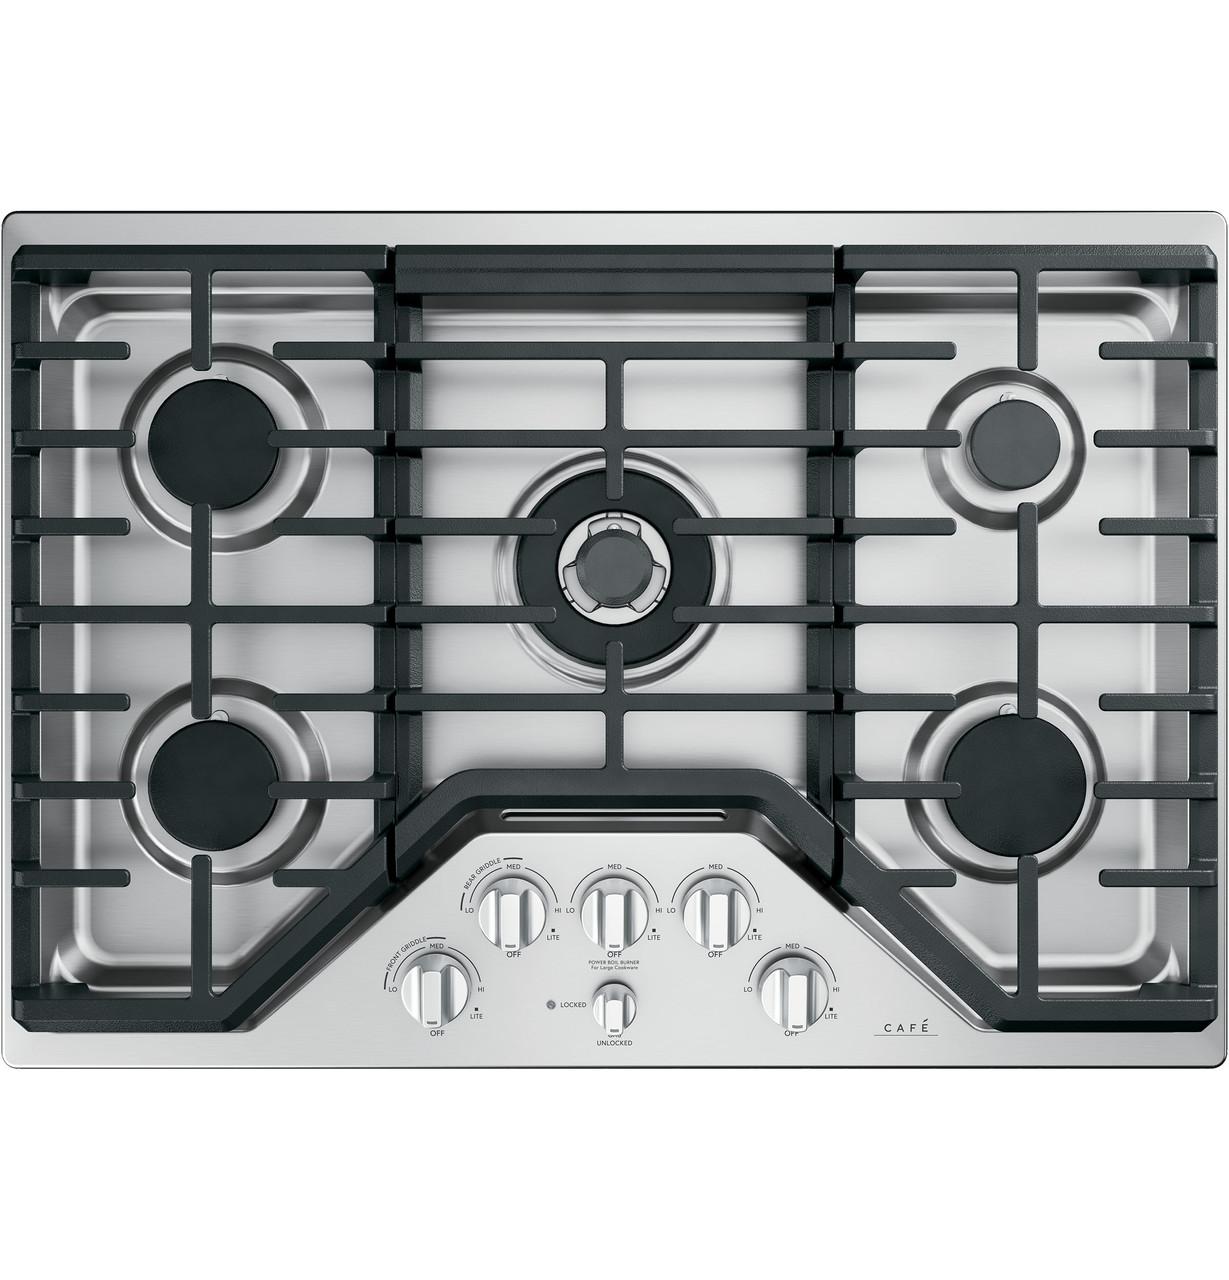 Cafe Caf(eback)™ 5 Gas Cooktop Knobs - Brushed Stainless